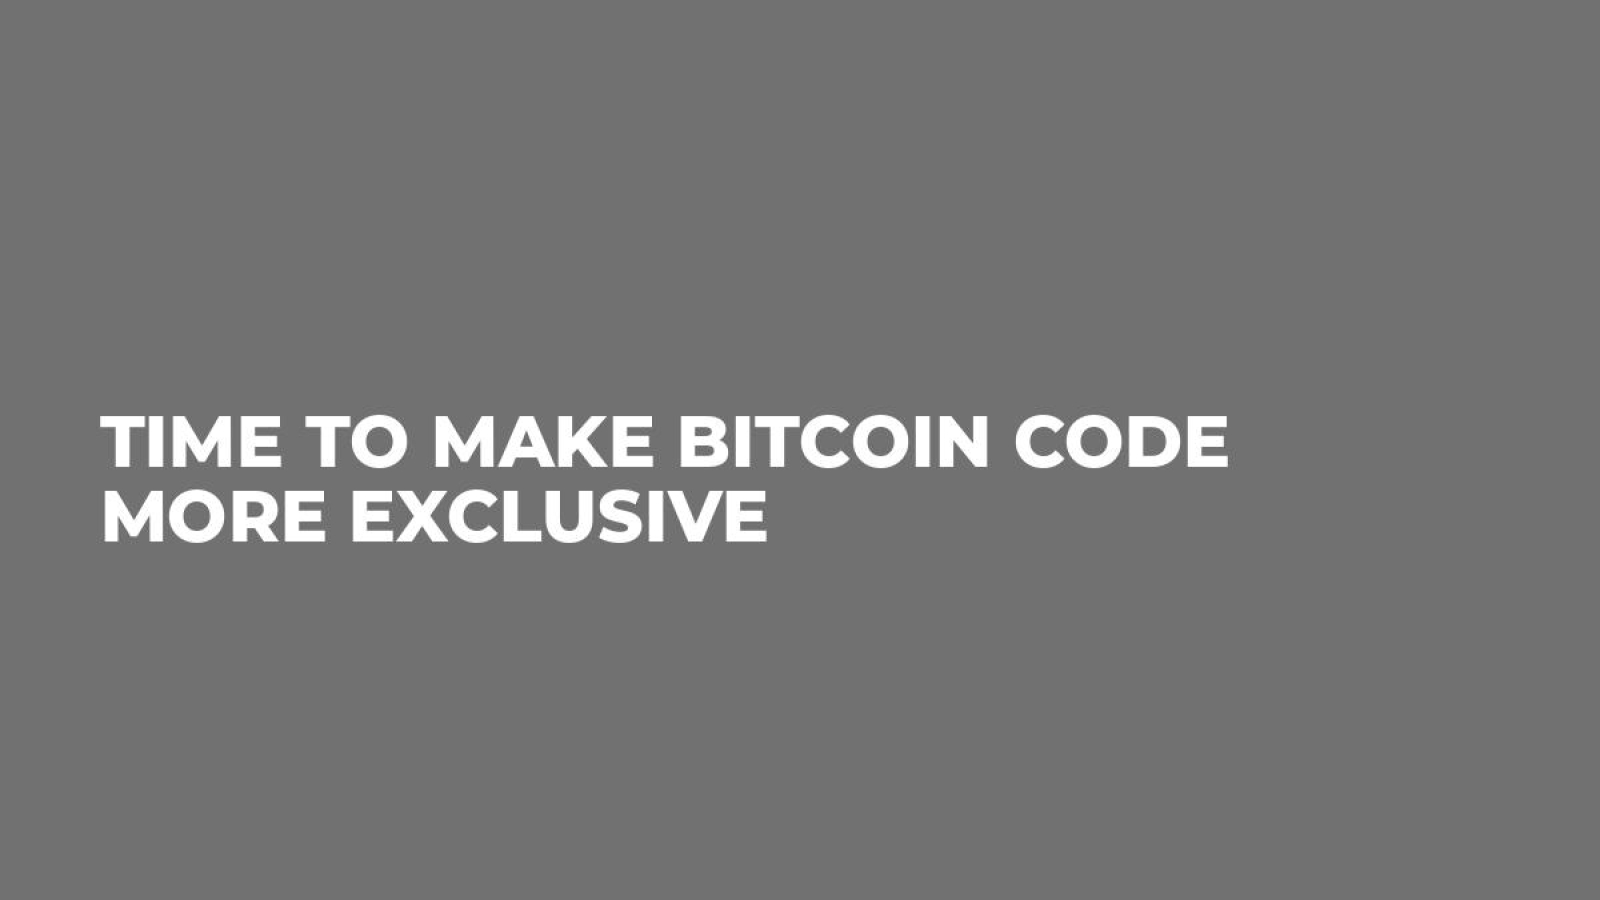 Time to Make Bitcoin Code More Exclusive